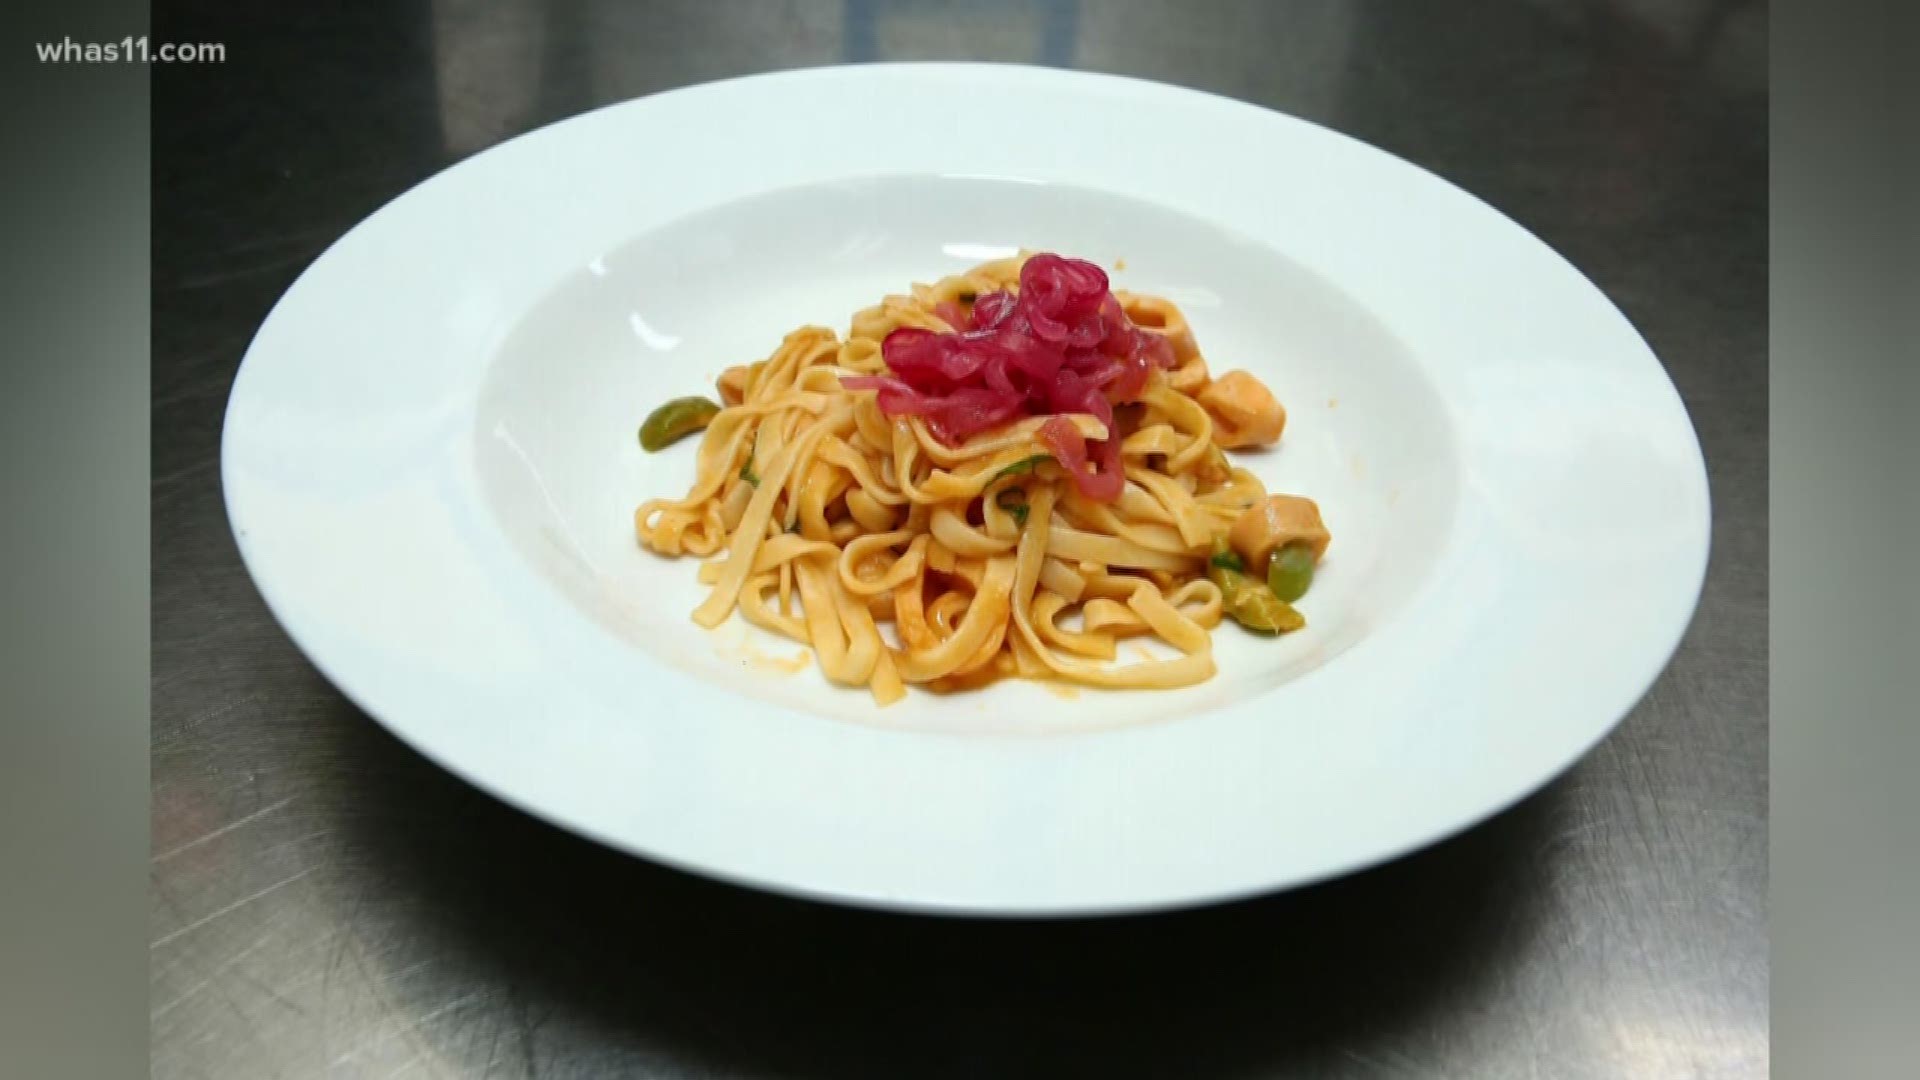 A new study reveals that pasta may not be as damaging to our diets as we believe.